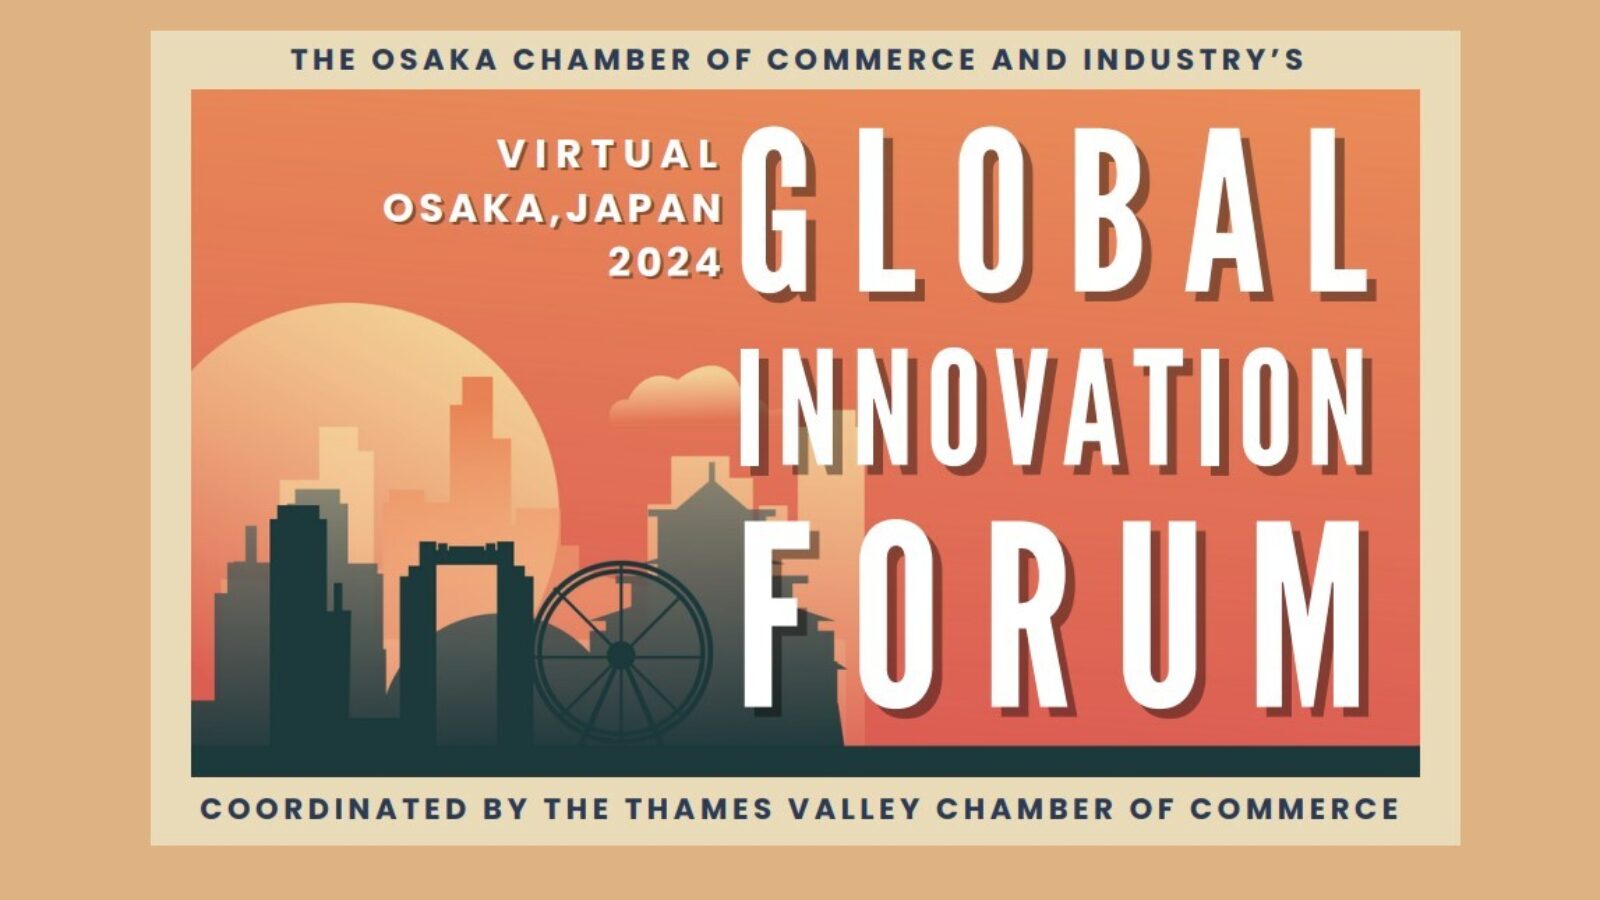 Thames Valley Chamber appointed national Co-ordinator for Osaka Chamber of Commerce for Global Innovation Forum